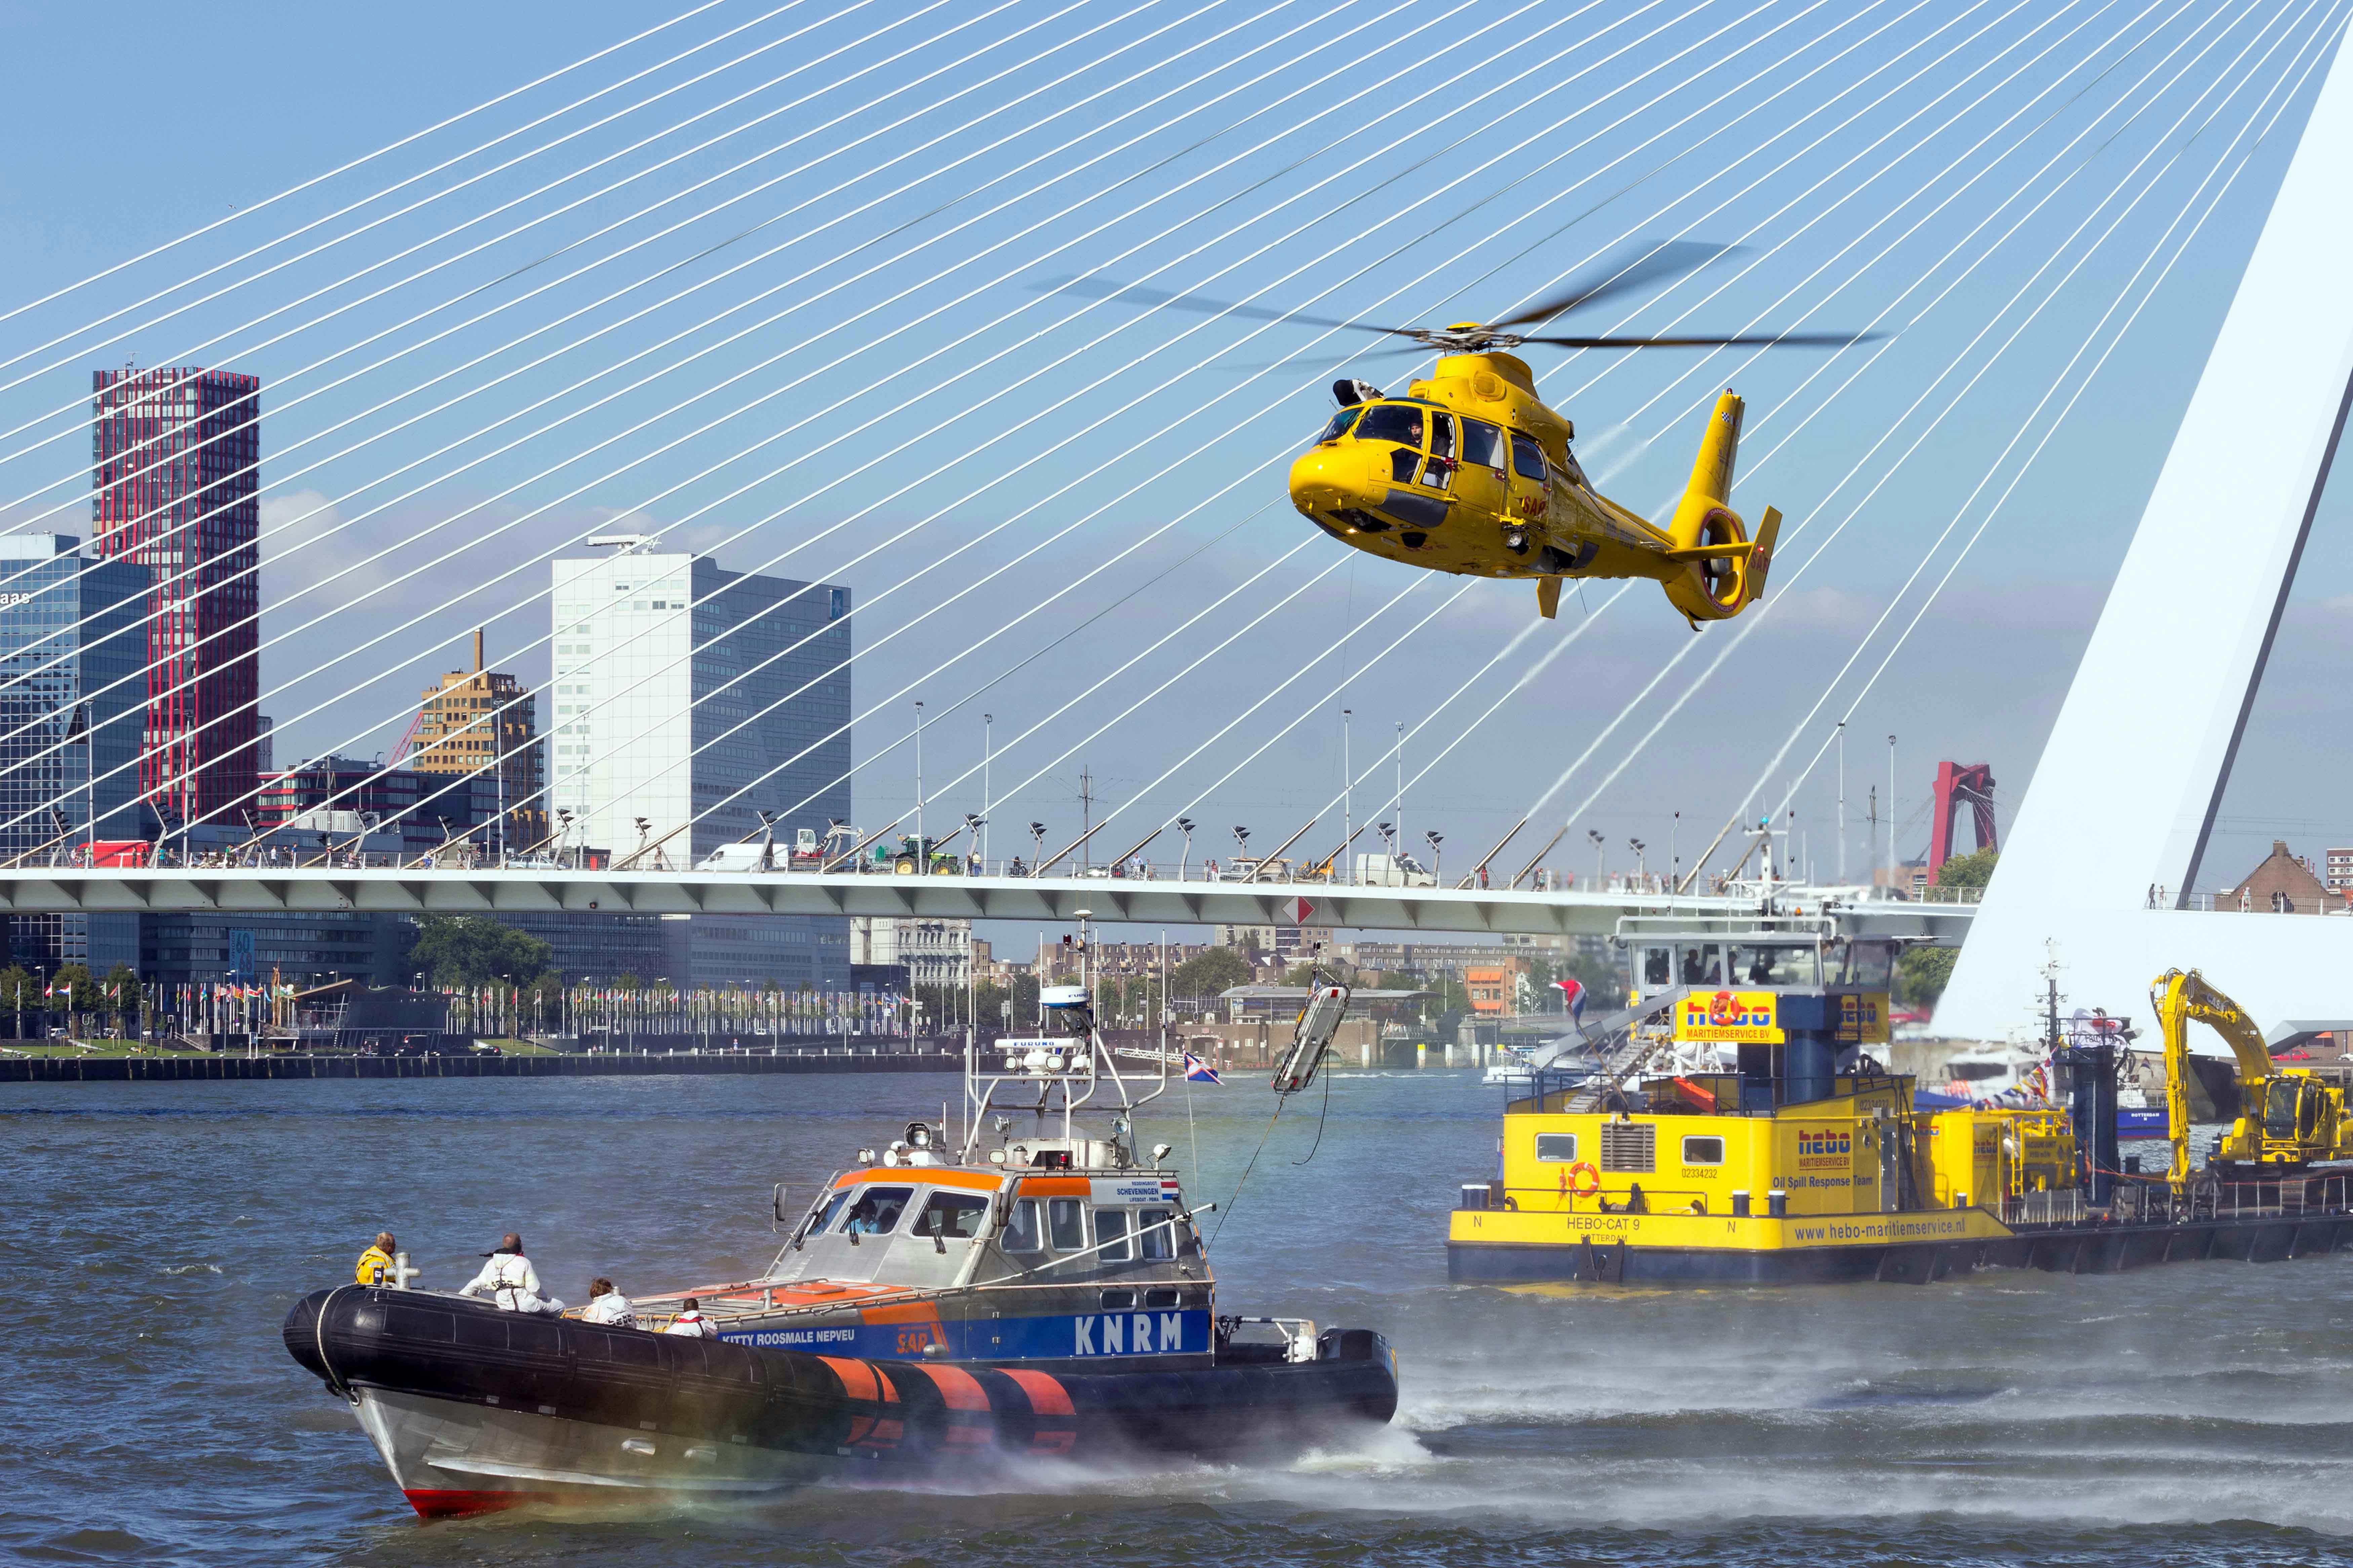 Boat, helicopter and ferry in an urban environment